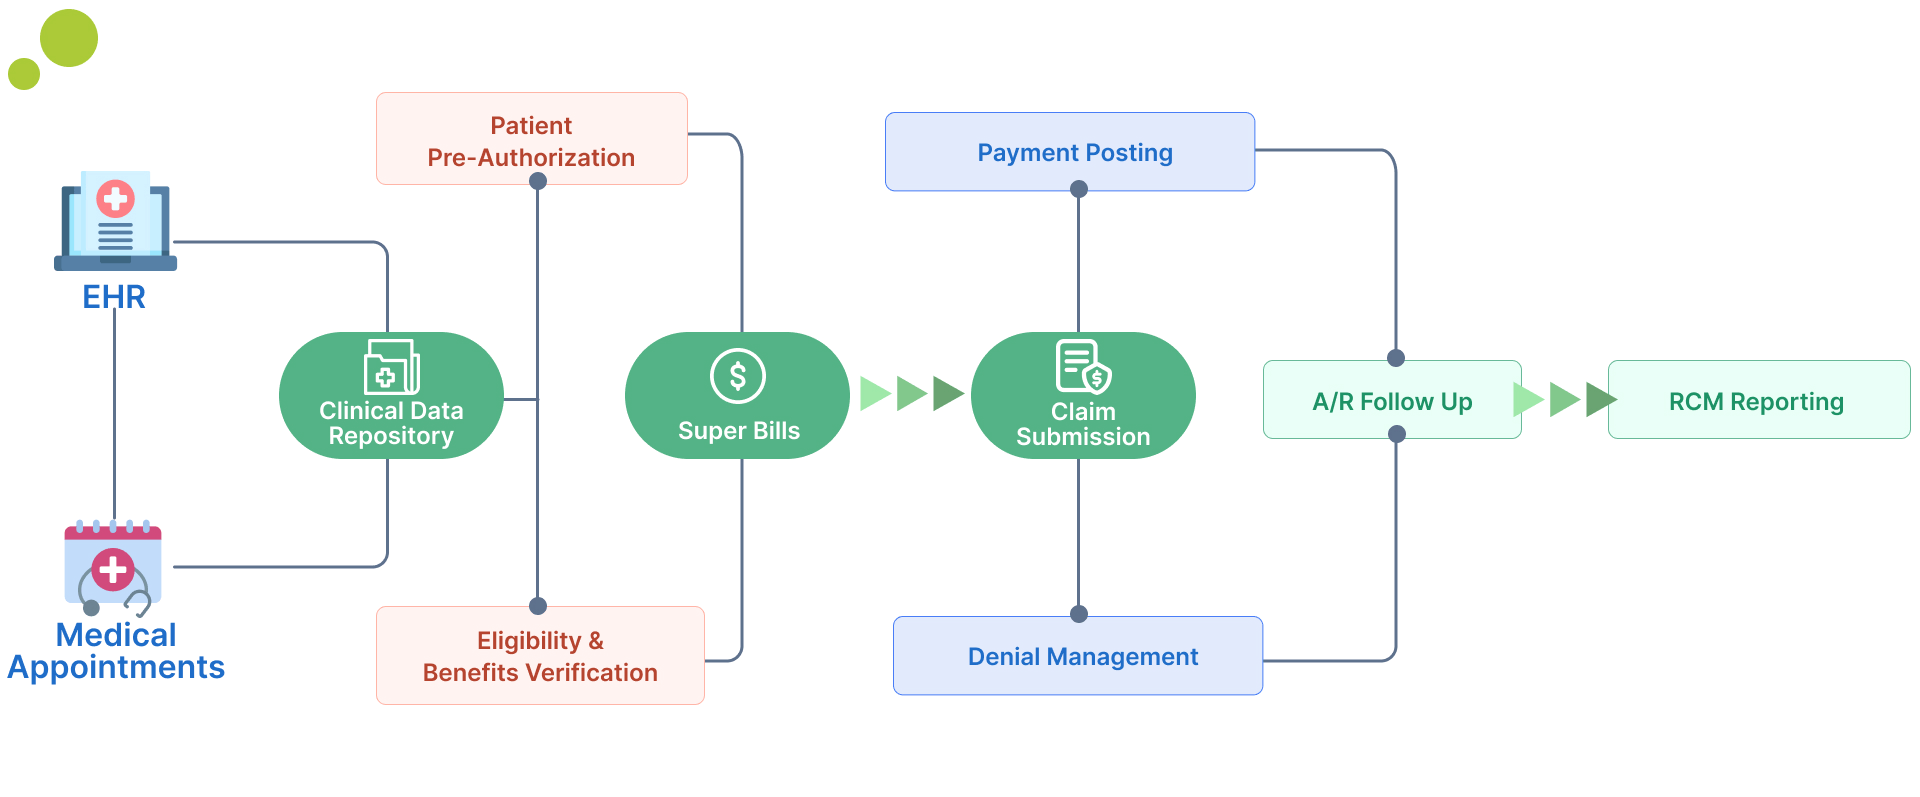 image showing typical workflow of dermatology emr software